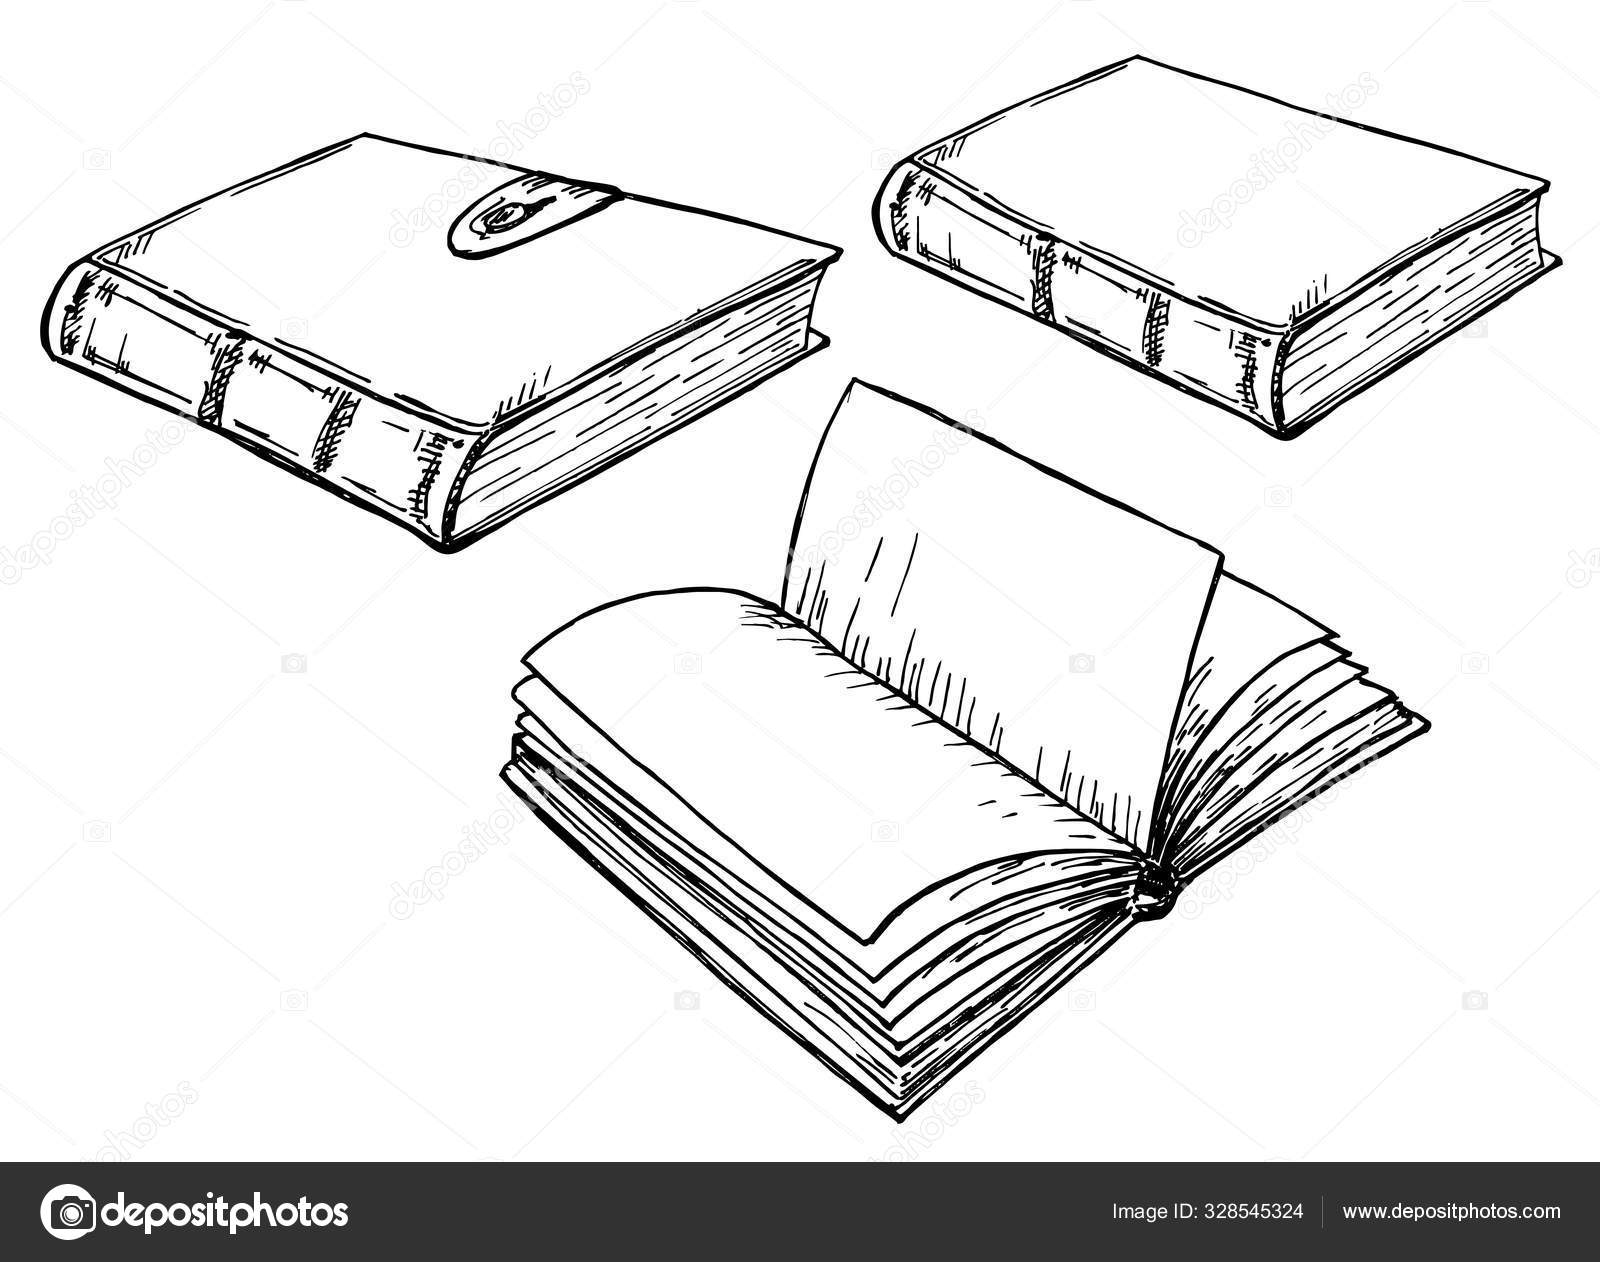 Books vector collection sketch. Pile of books. Hand drawn